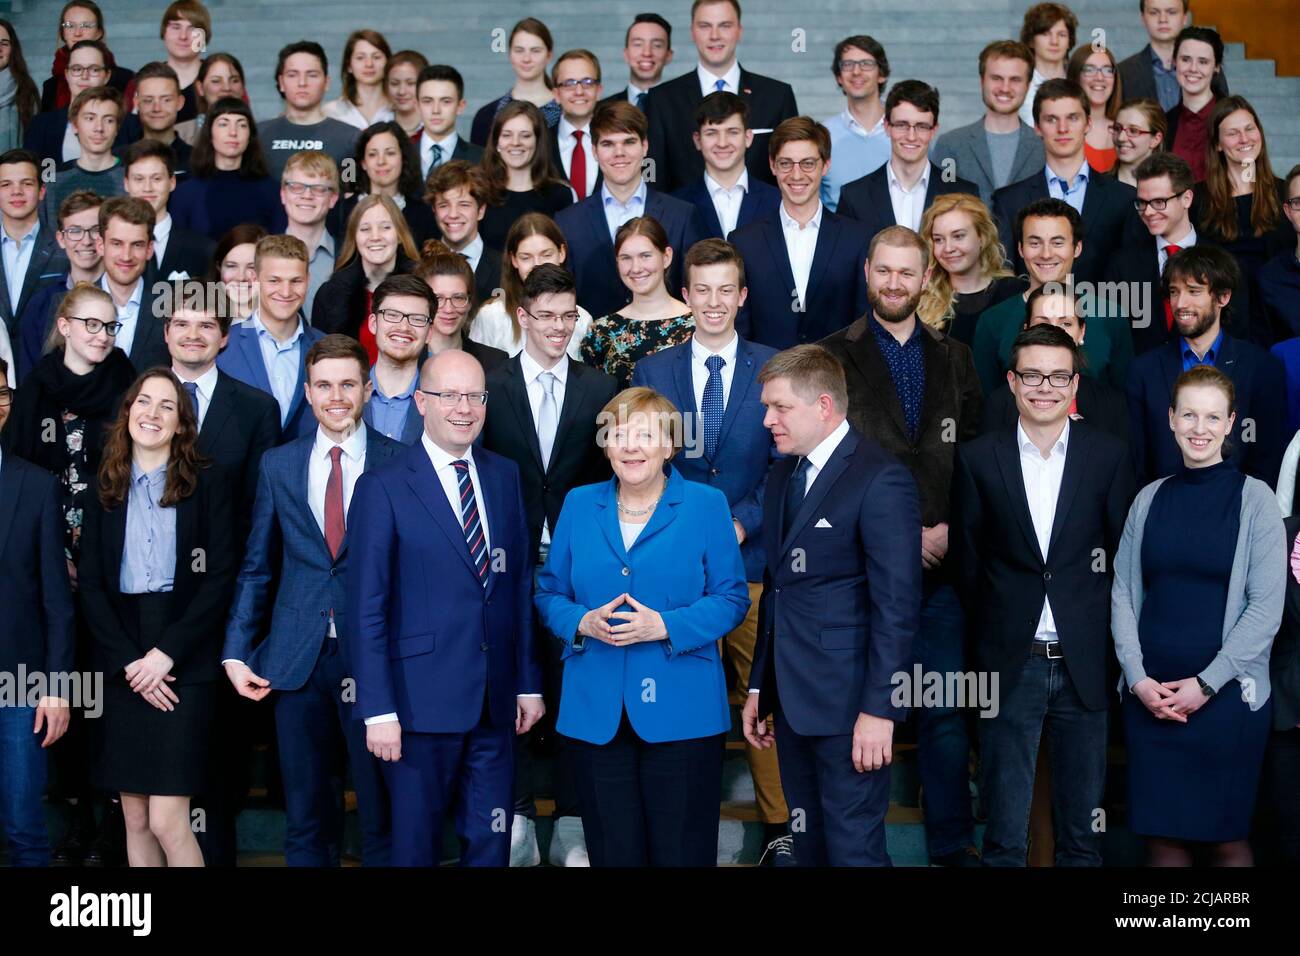 Czech Republic Prime Minister Bohuslav Sobotka (L to R), German Chancellor Angela Merkel and Slovakian Prime Minister Robert Fico  pose for a picture with school pupils of all three countries at the Chancellery in Berlin, Germany, April 3, 2017. REUTERS/Hannibal Hanschke Foto de stock